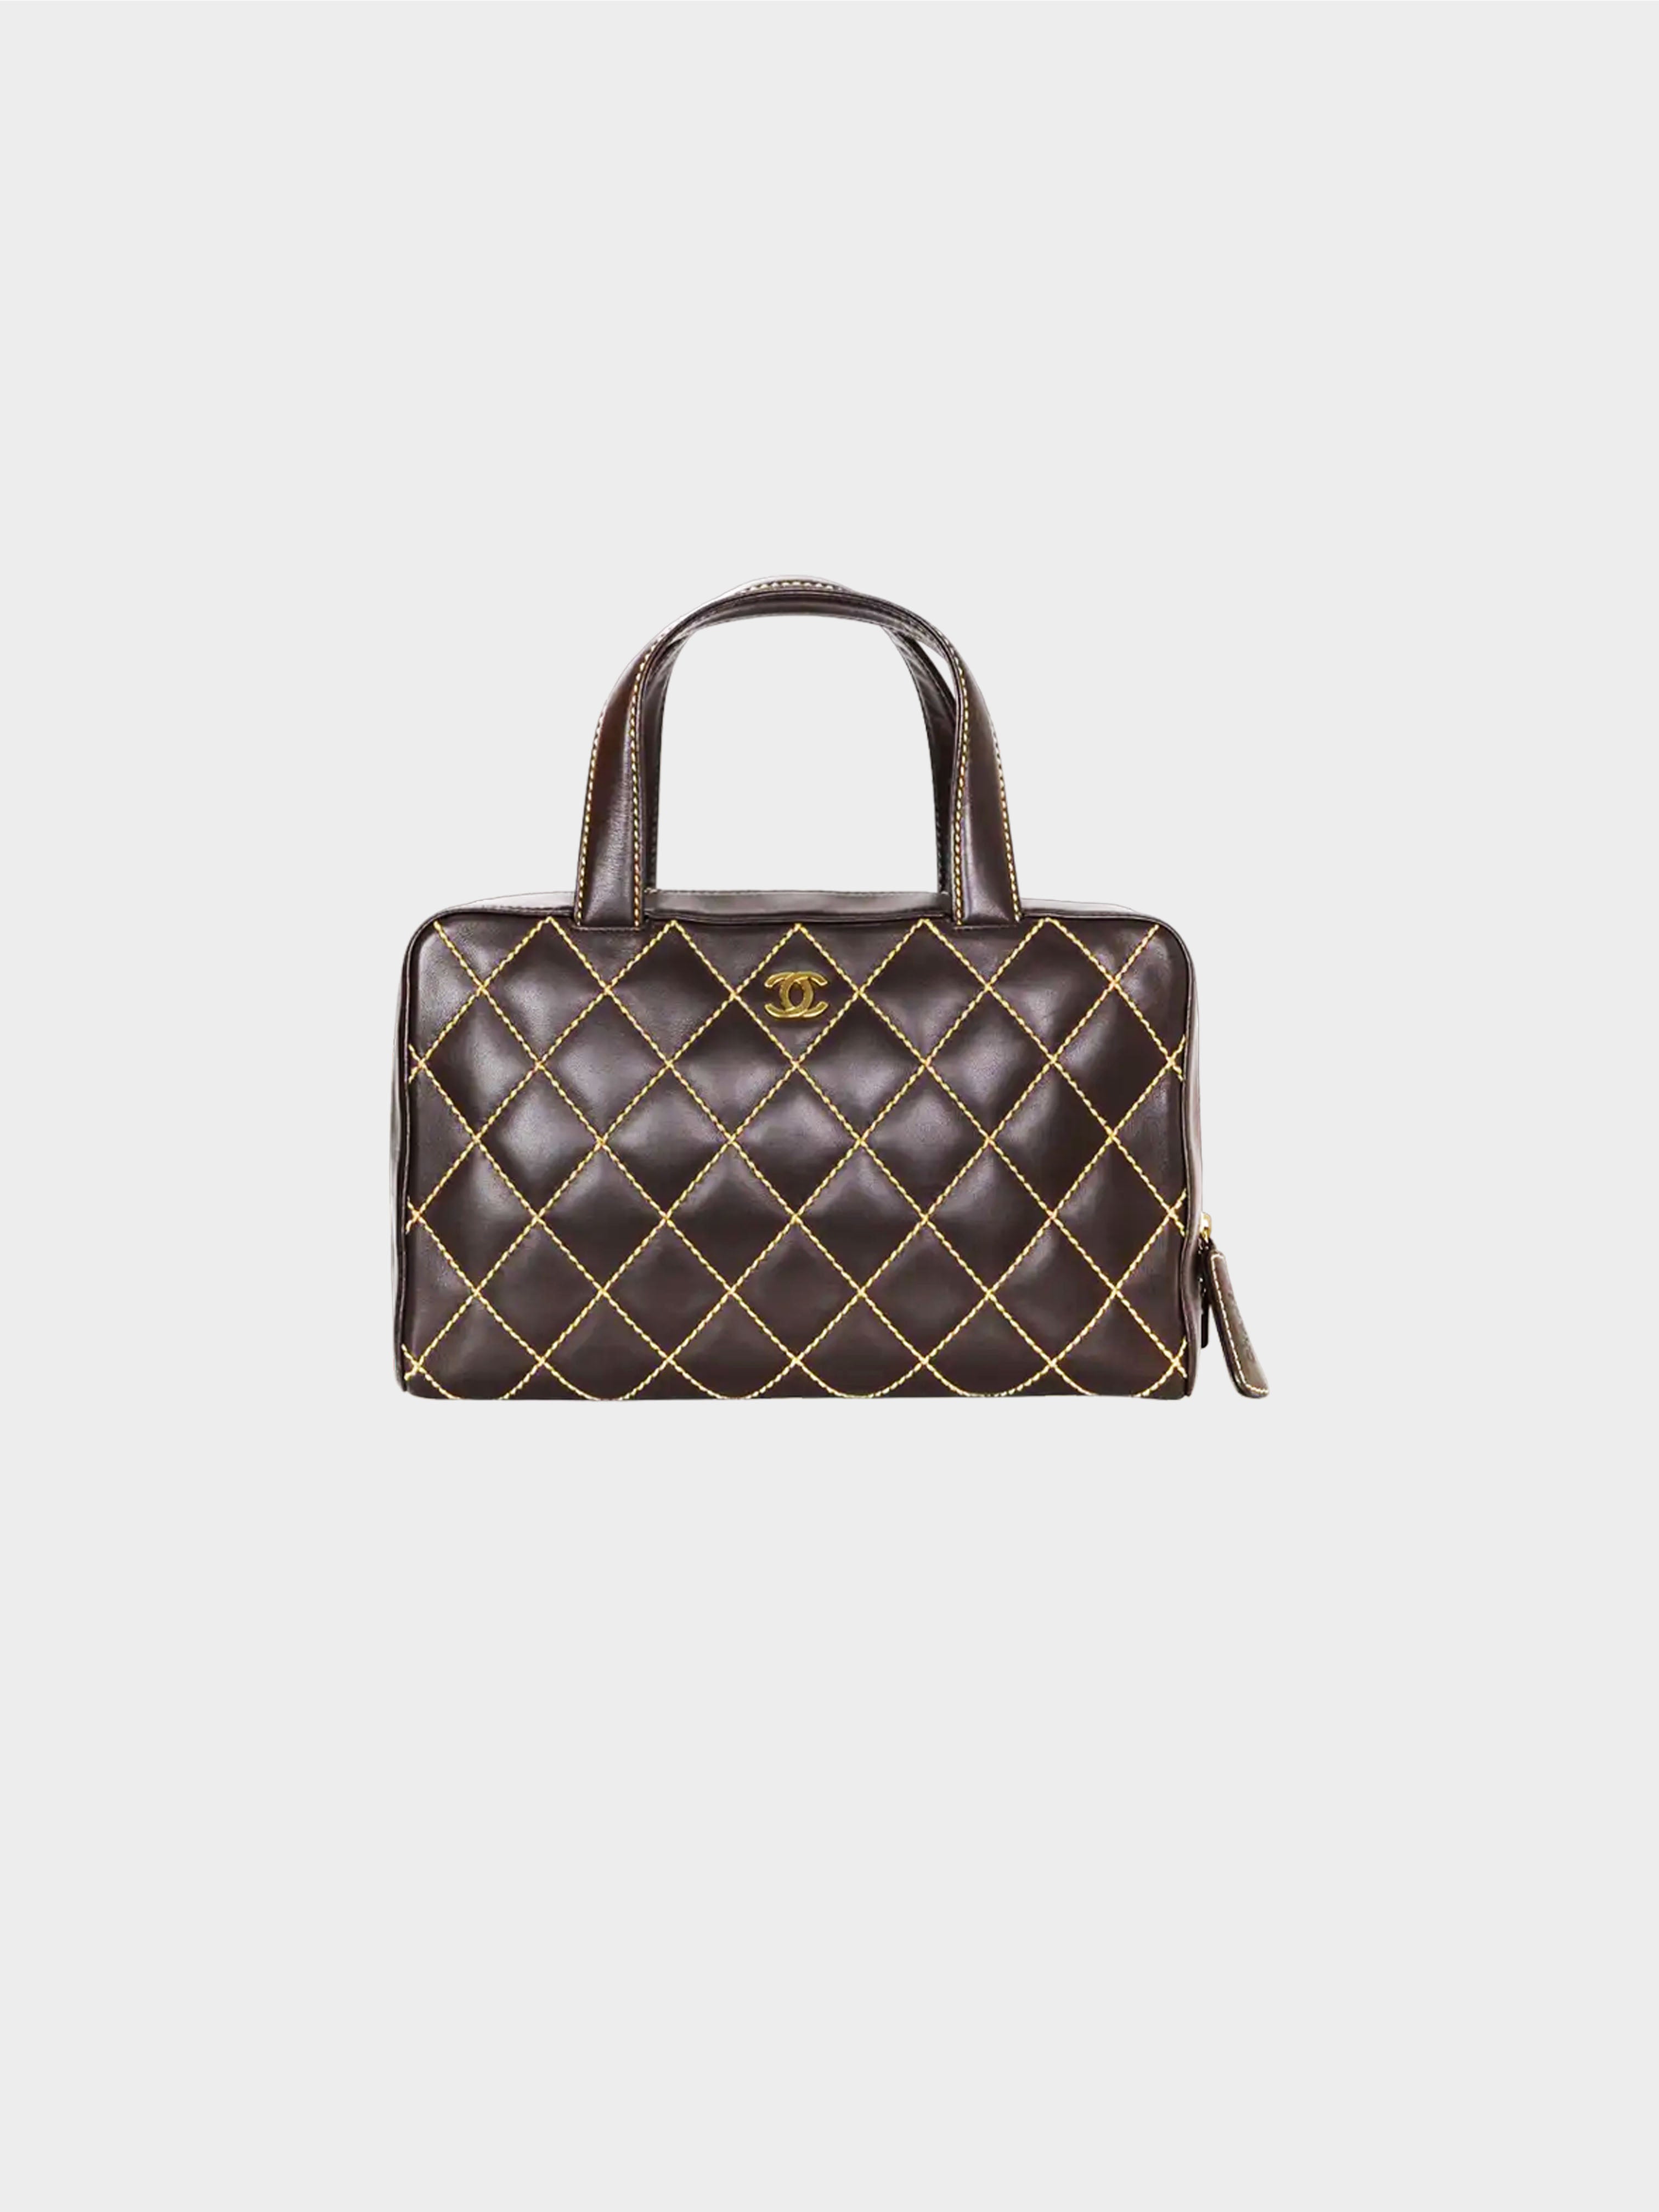 CHANEL Quilted Leather Surpique Bowler Bag Brown